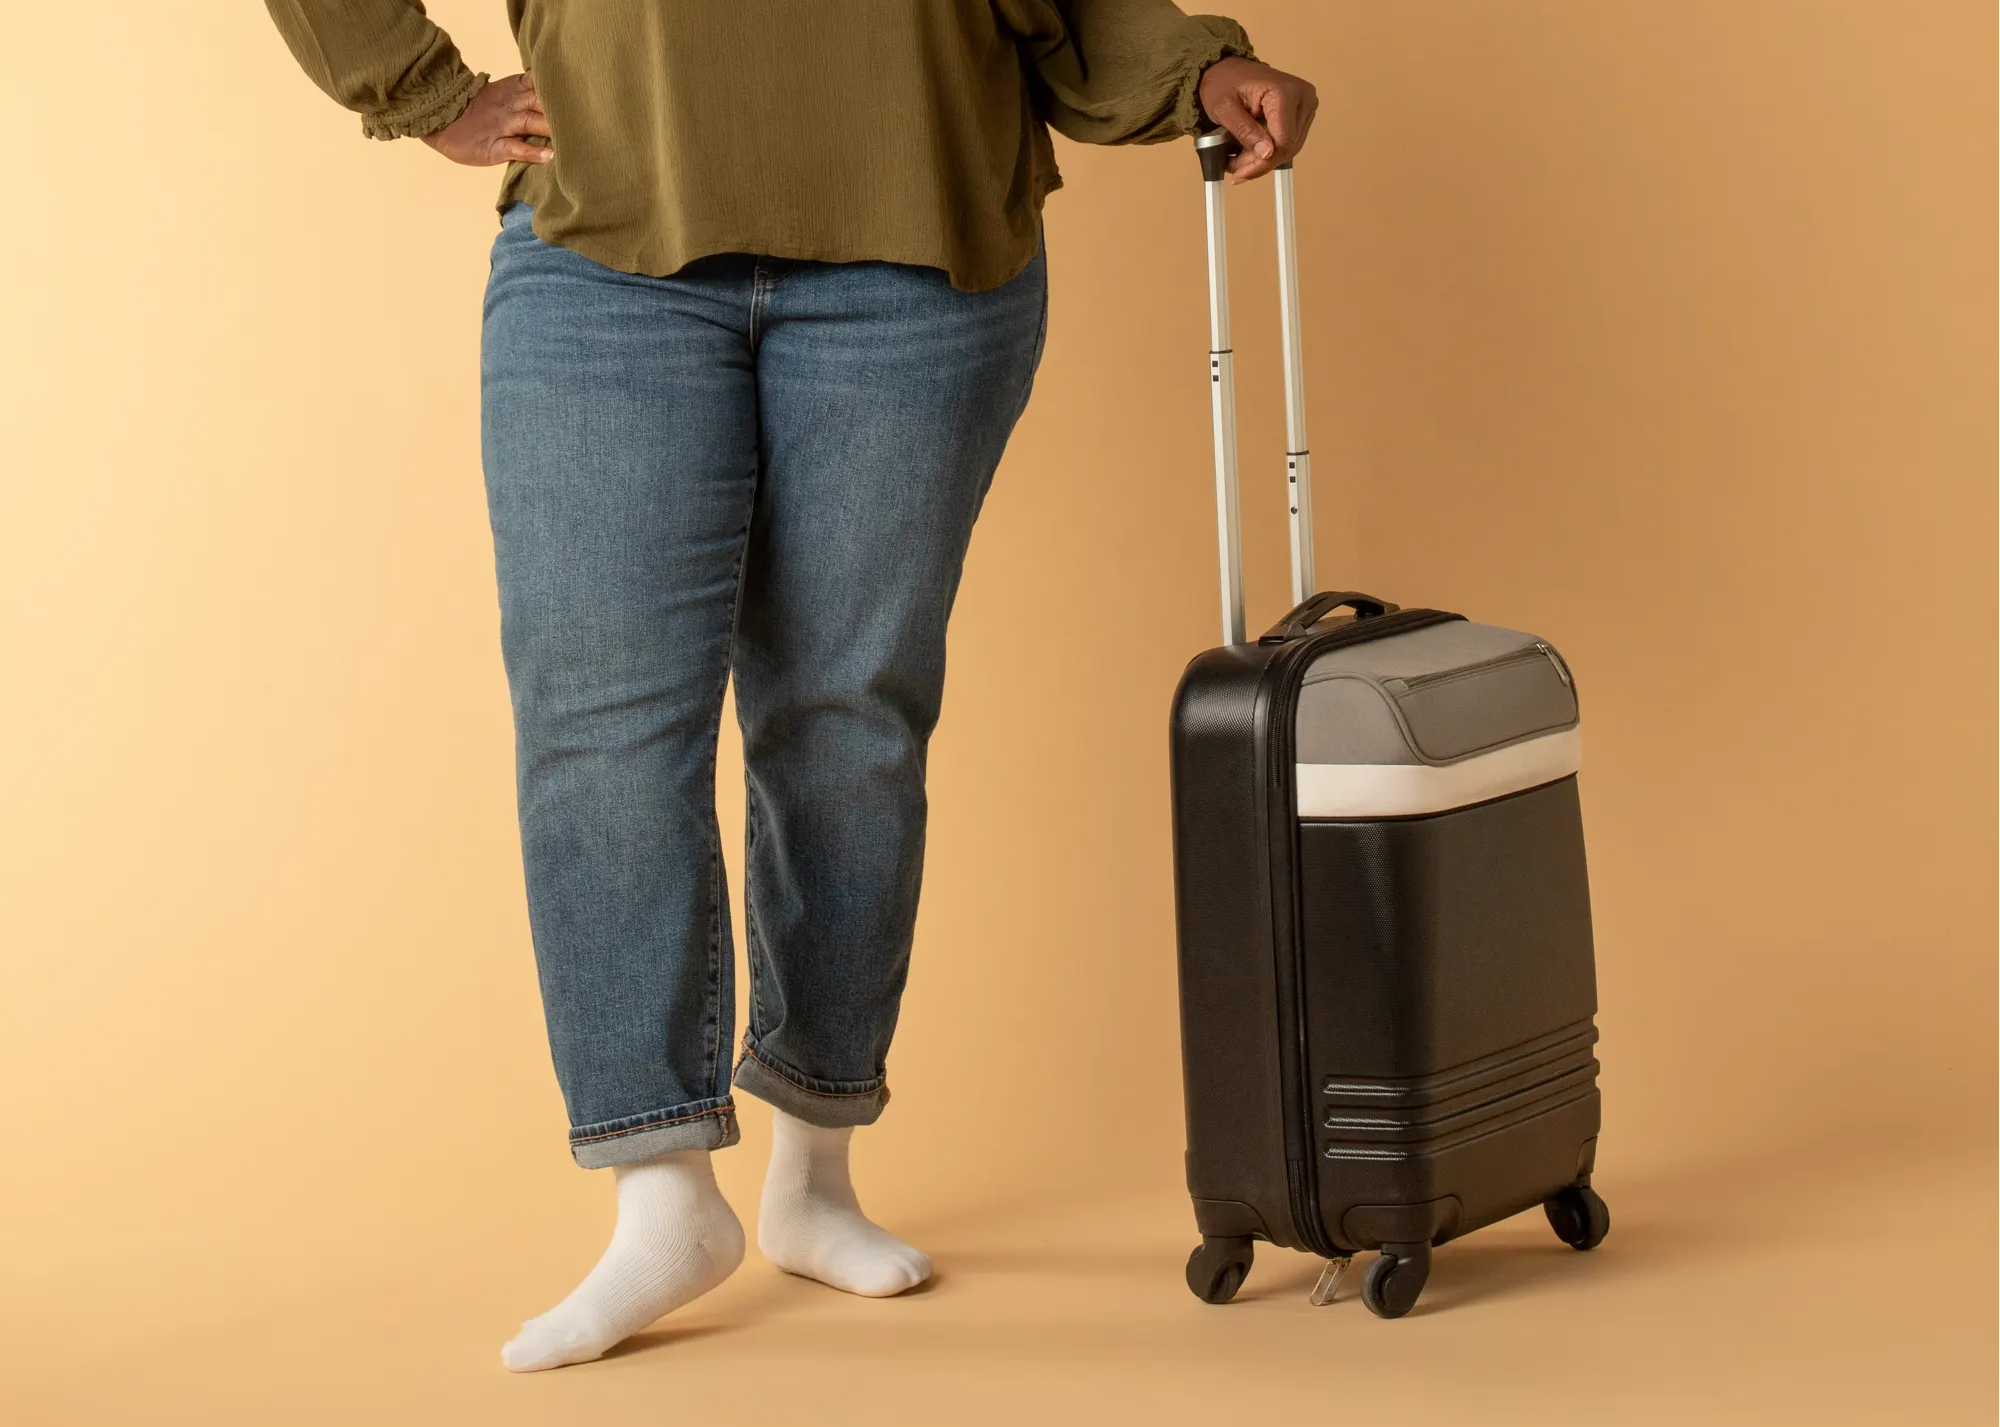 woman wearing Therafirm compression socks, woman holding luggage, woman traveling